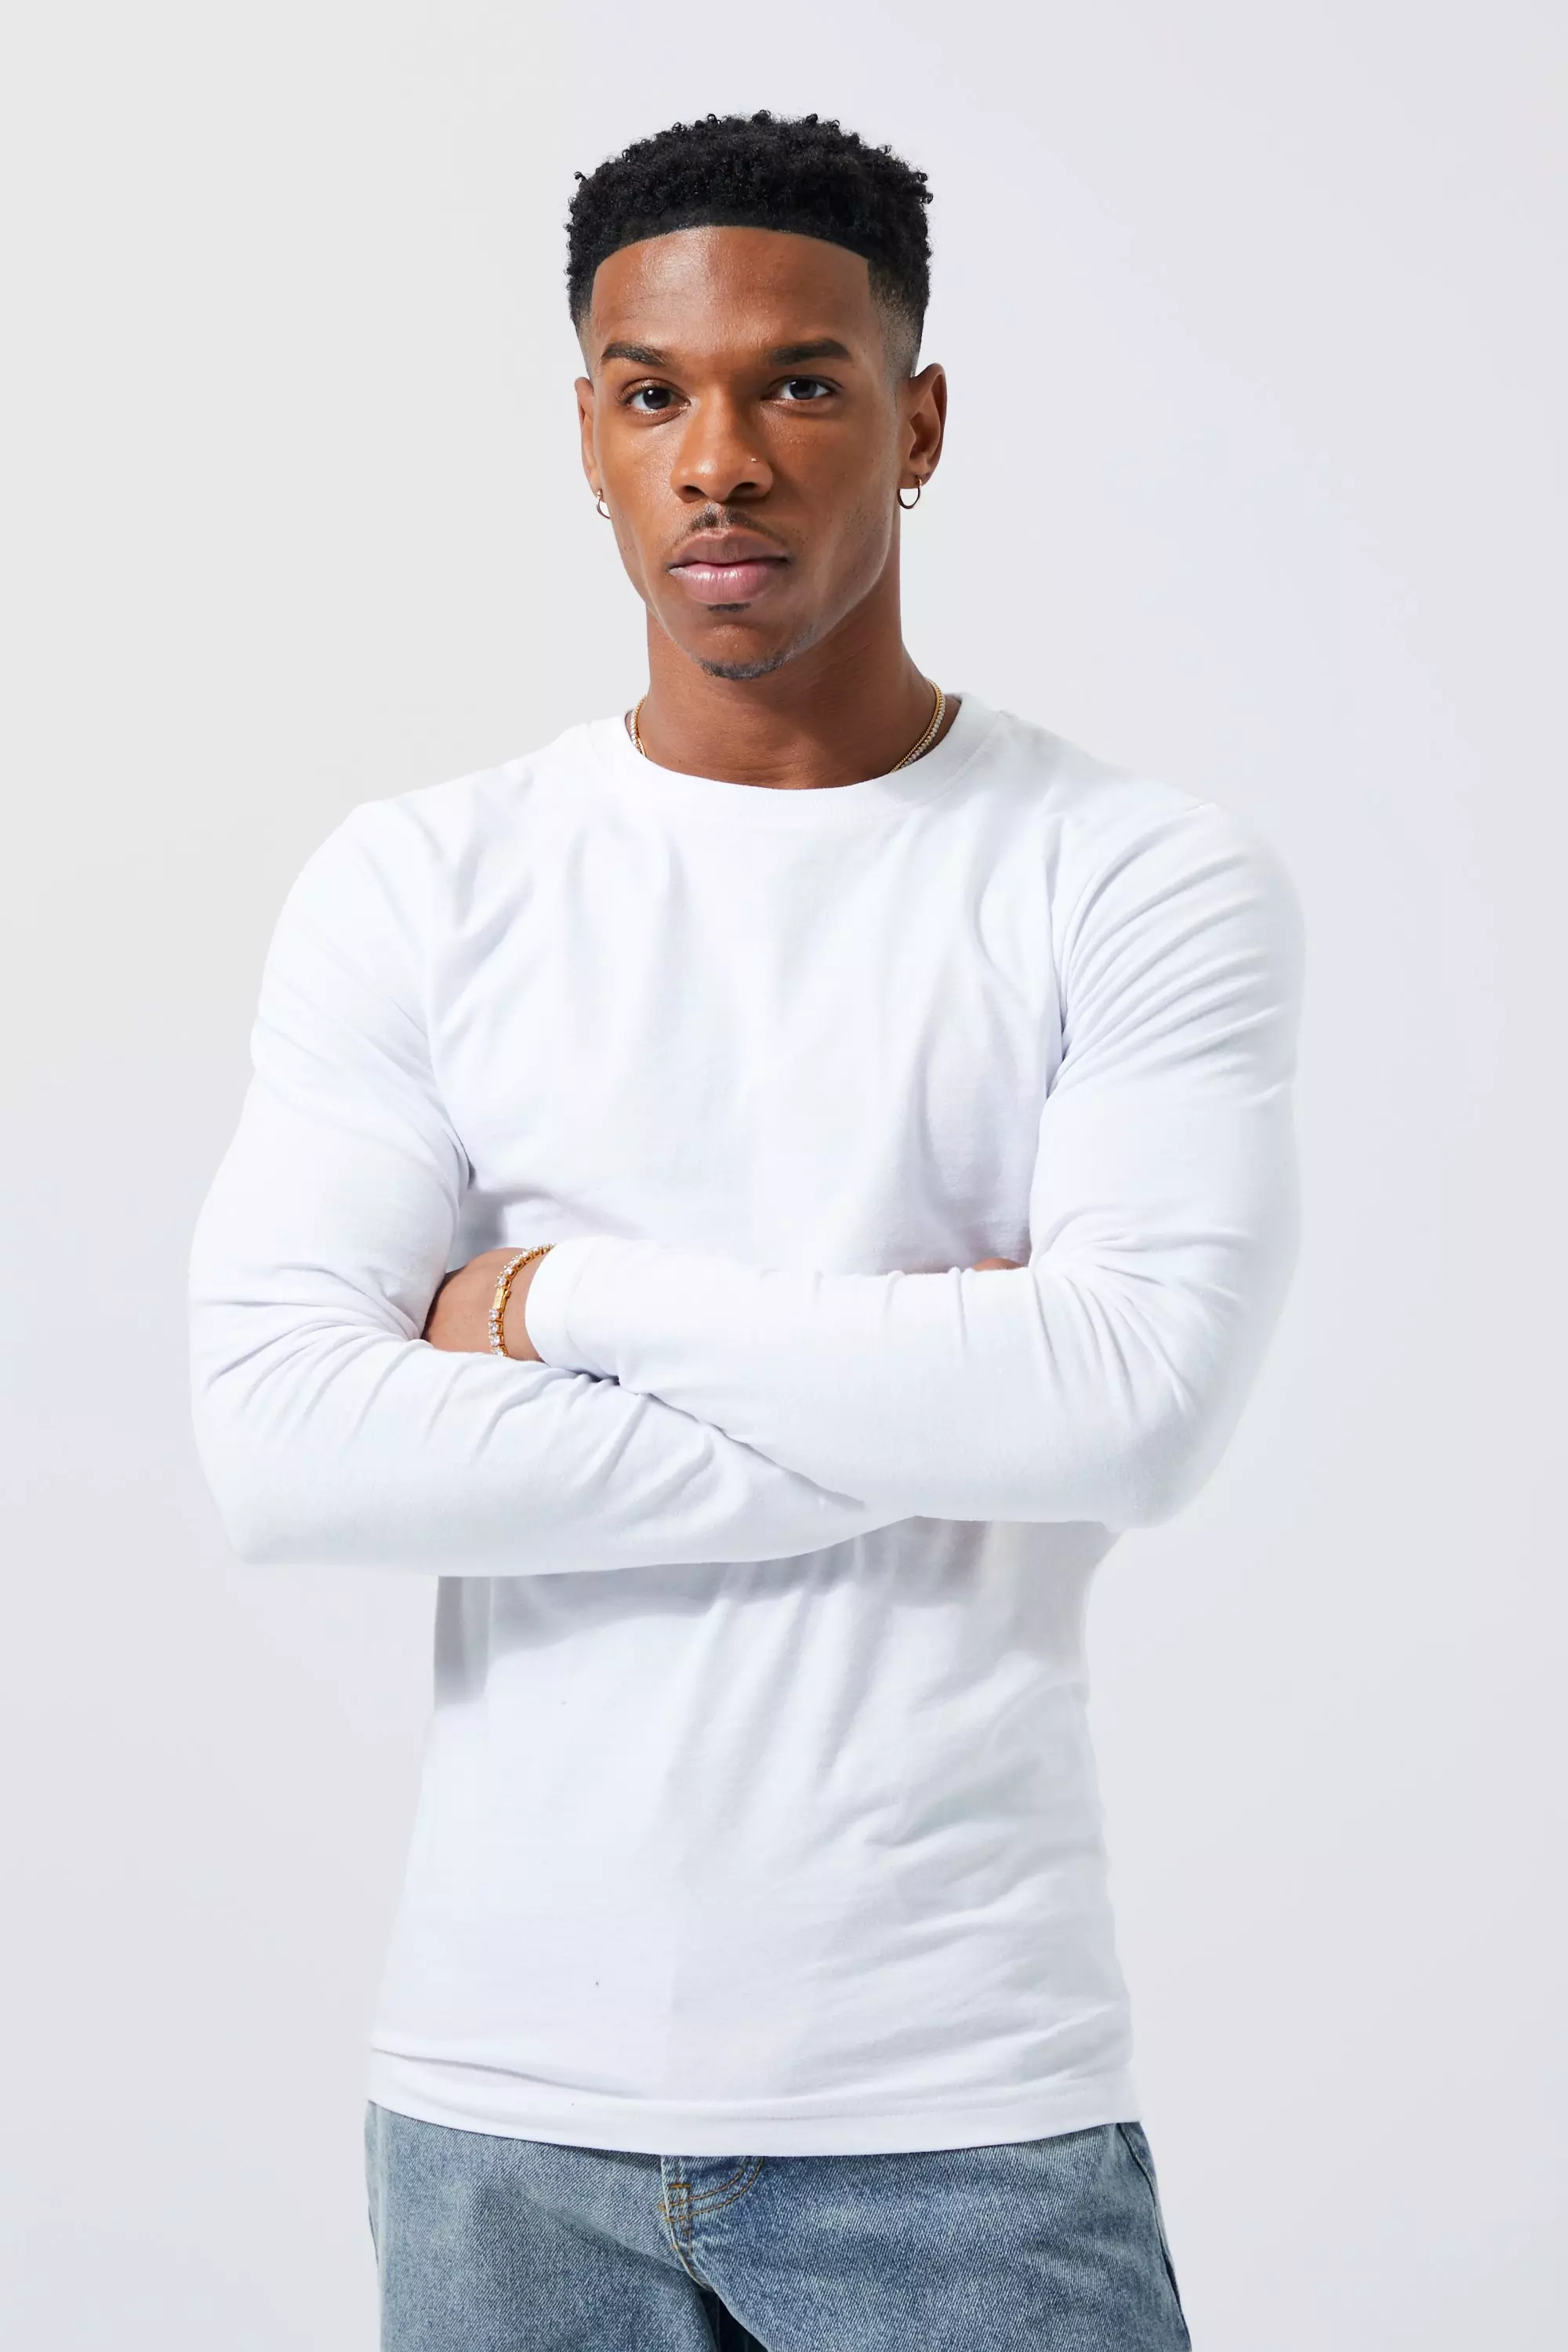 The North Face East back print long sleeve t-shirt in white, ASOS